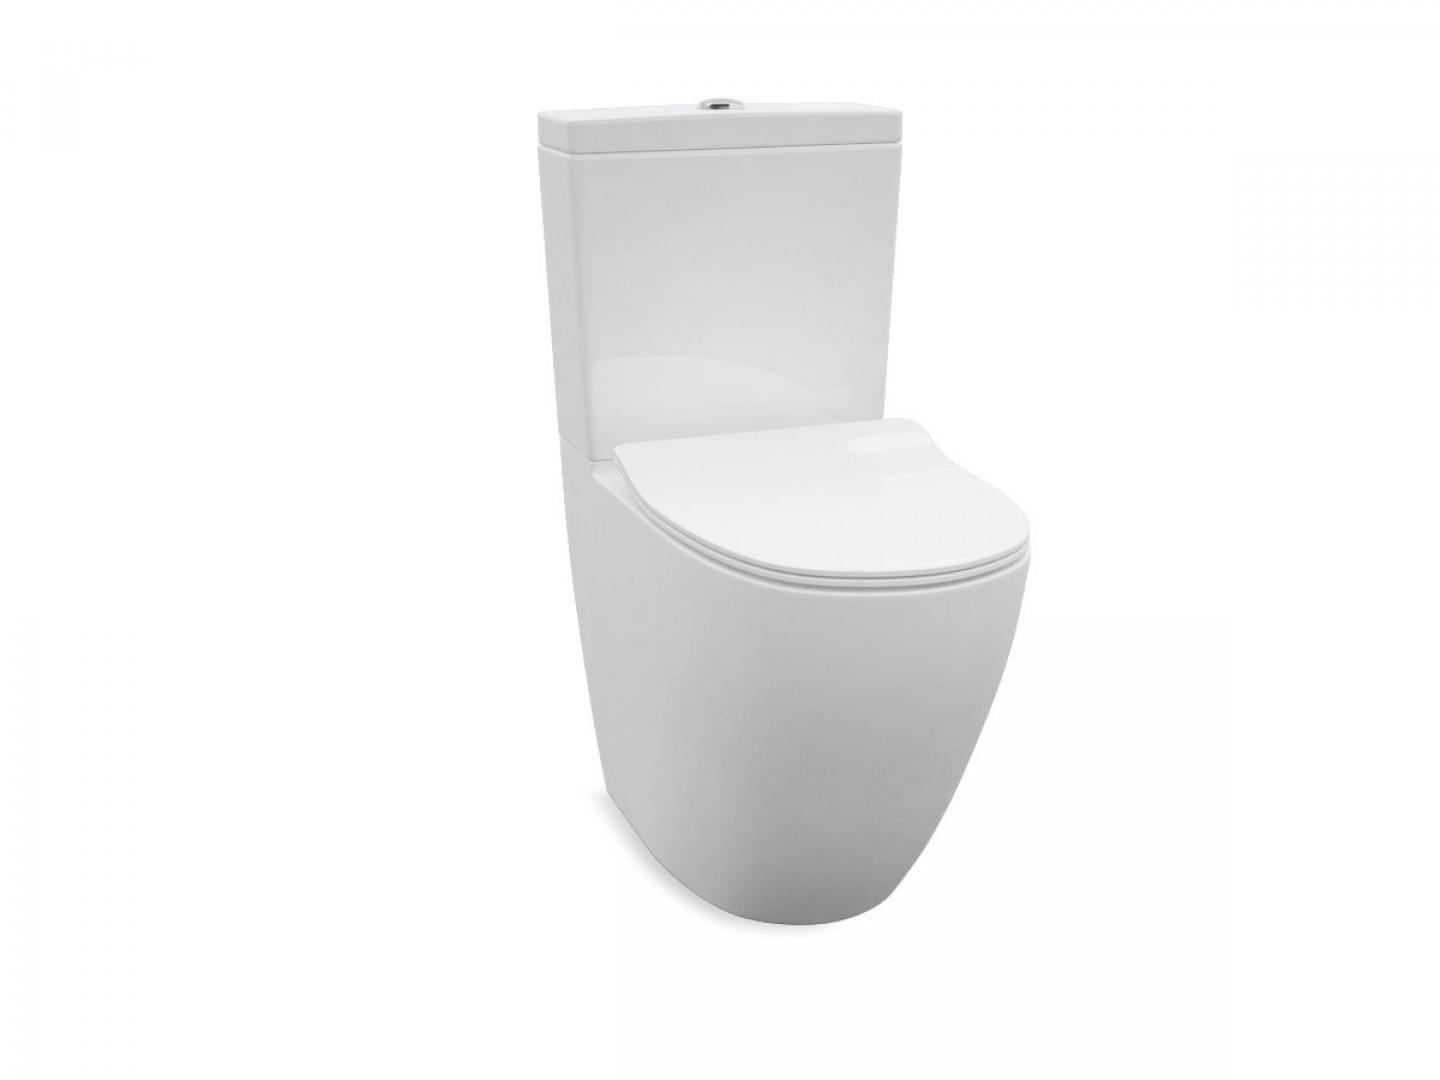 Enware Wall Faced Rimless Close-Coupled Toilet Suite - EBTW610 from Enware